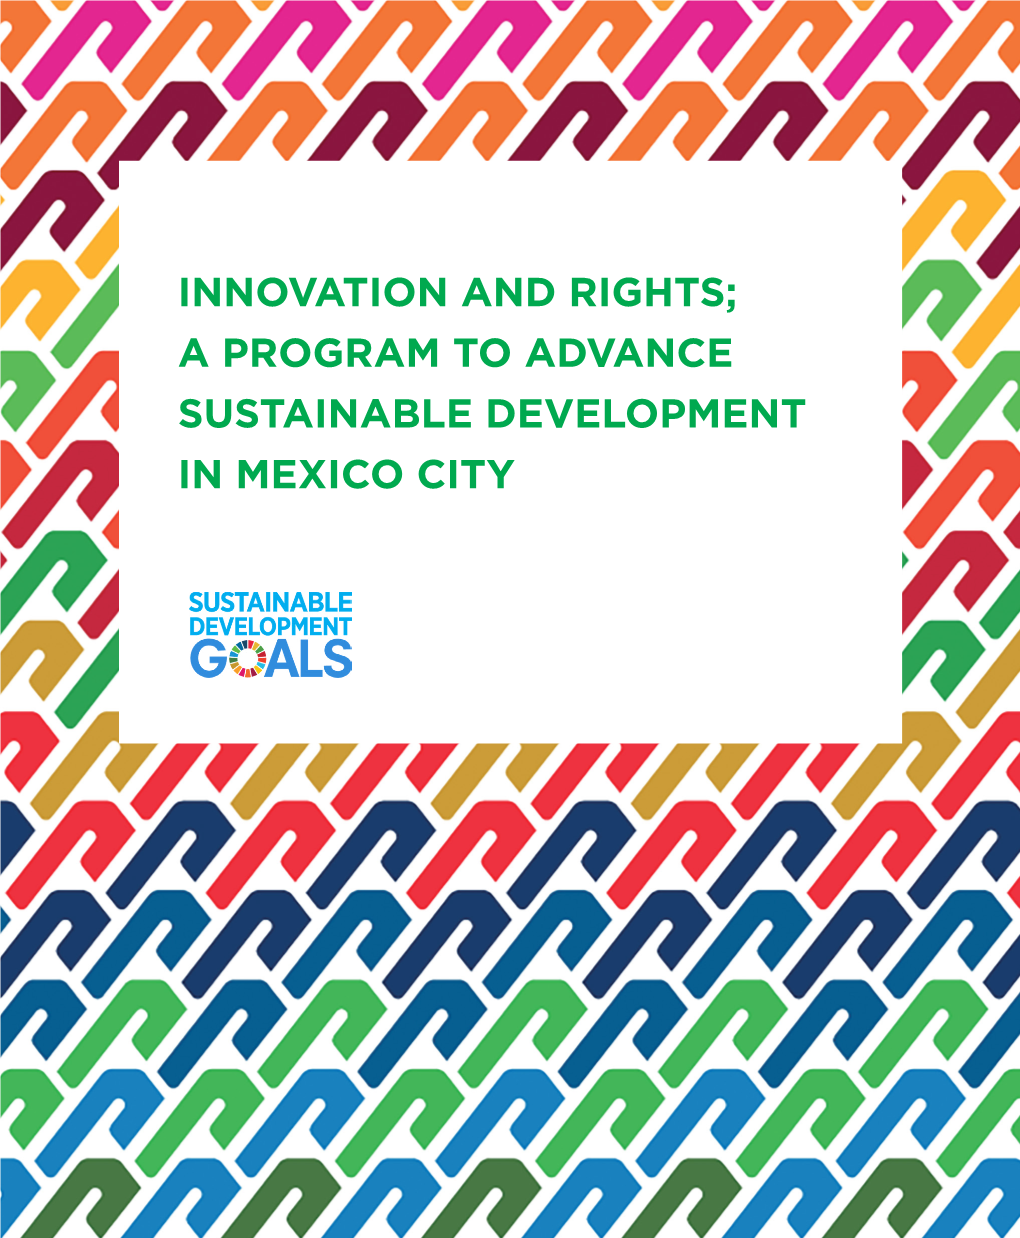 A Program to Advance Sustainable Development in Mexico City